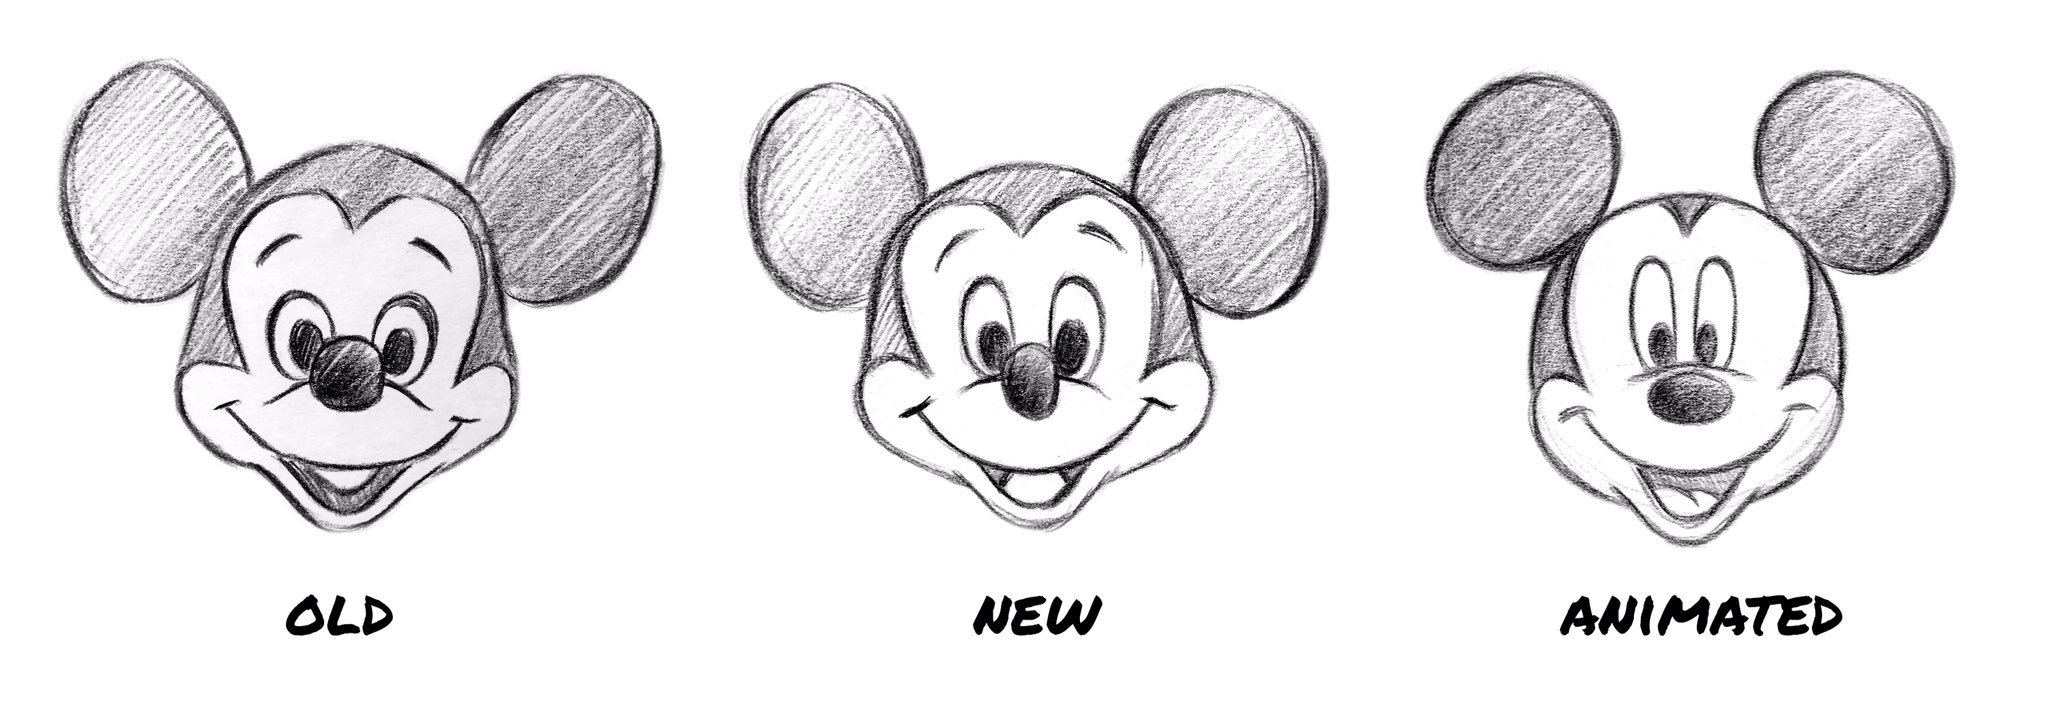 Download Mickey Mouse Disney Head Drawing Wallpaper | Wallpapers.com